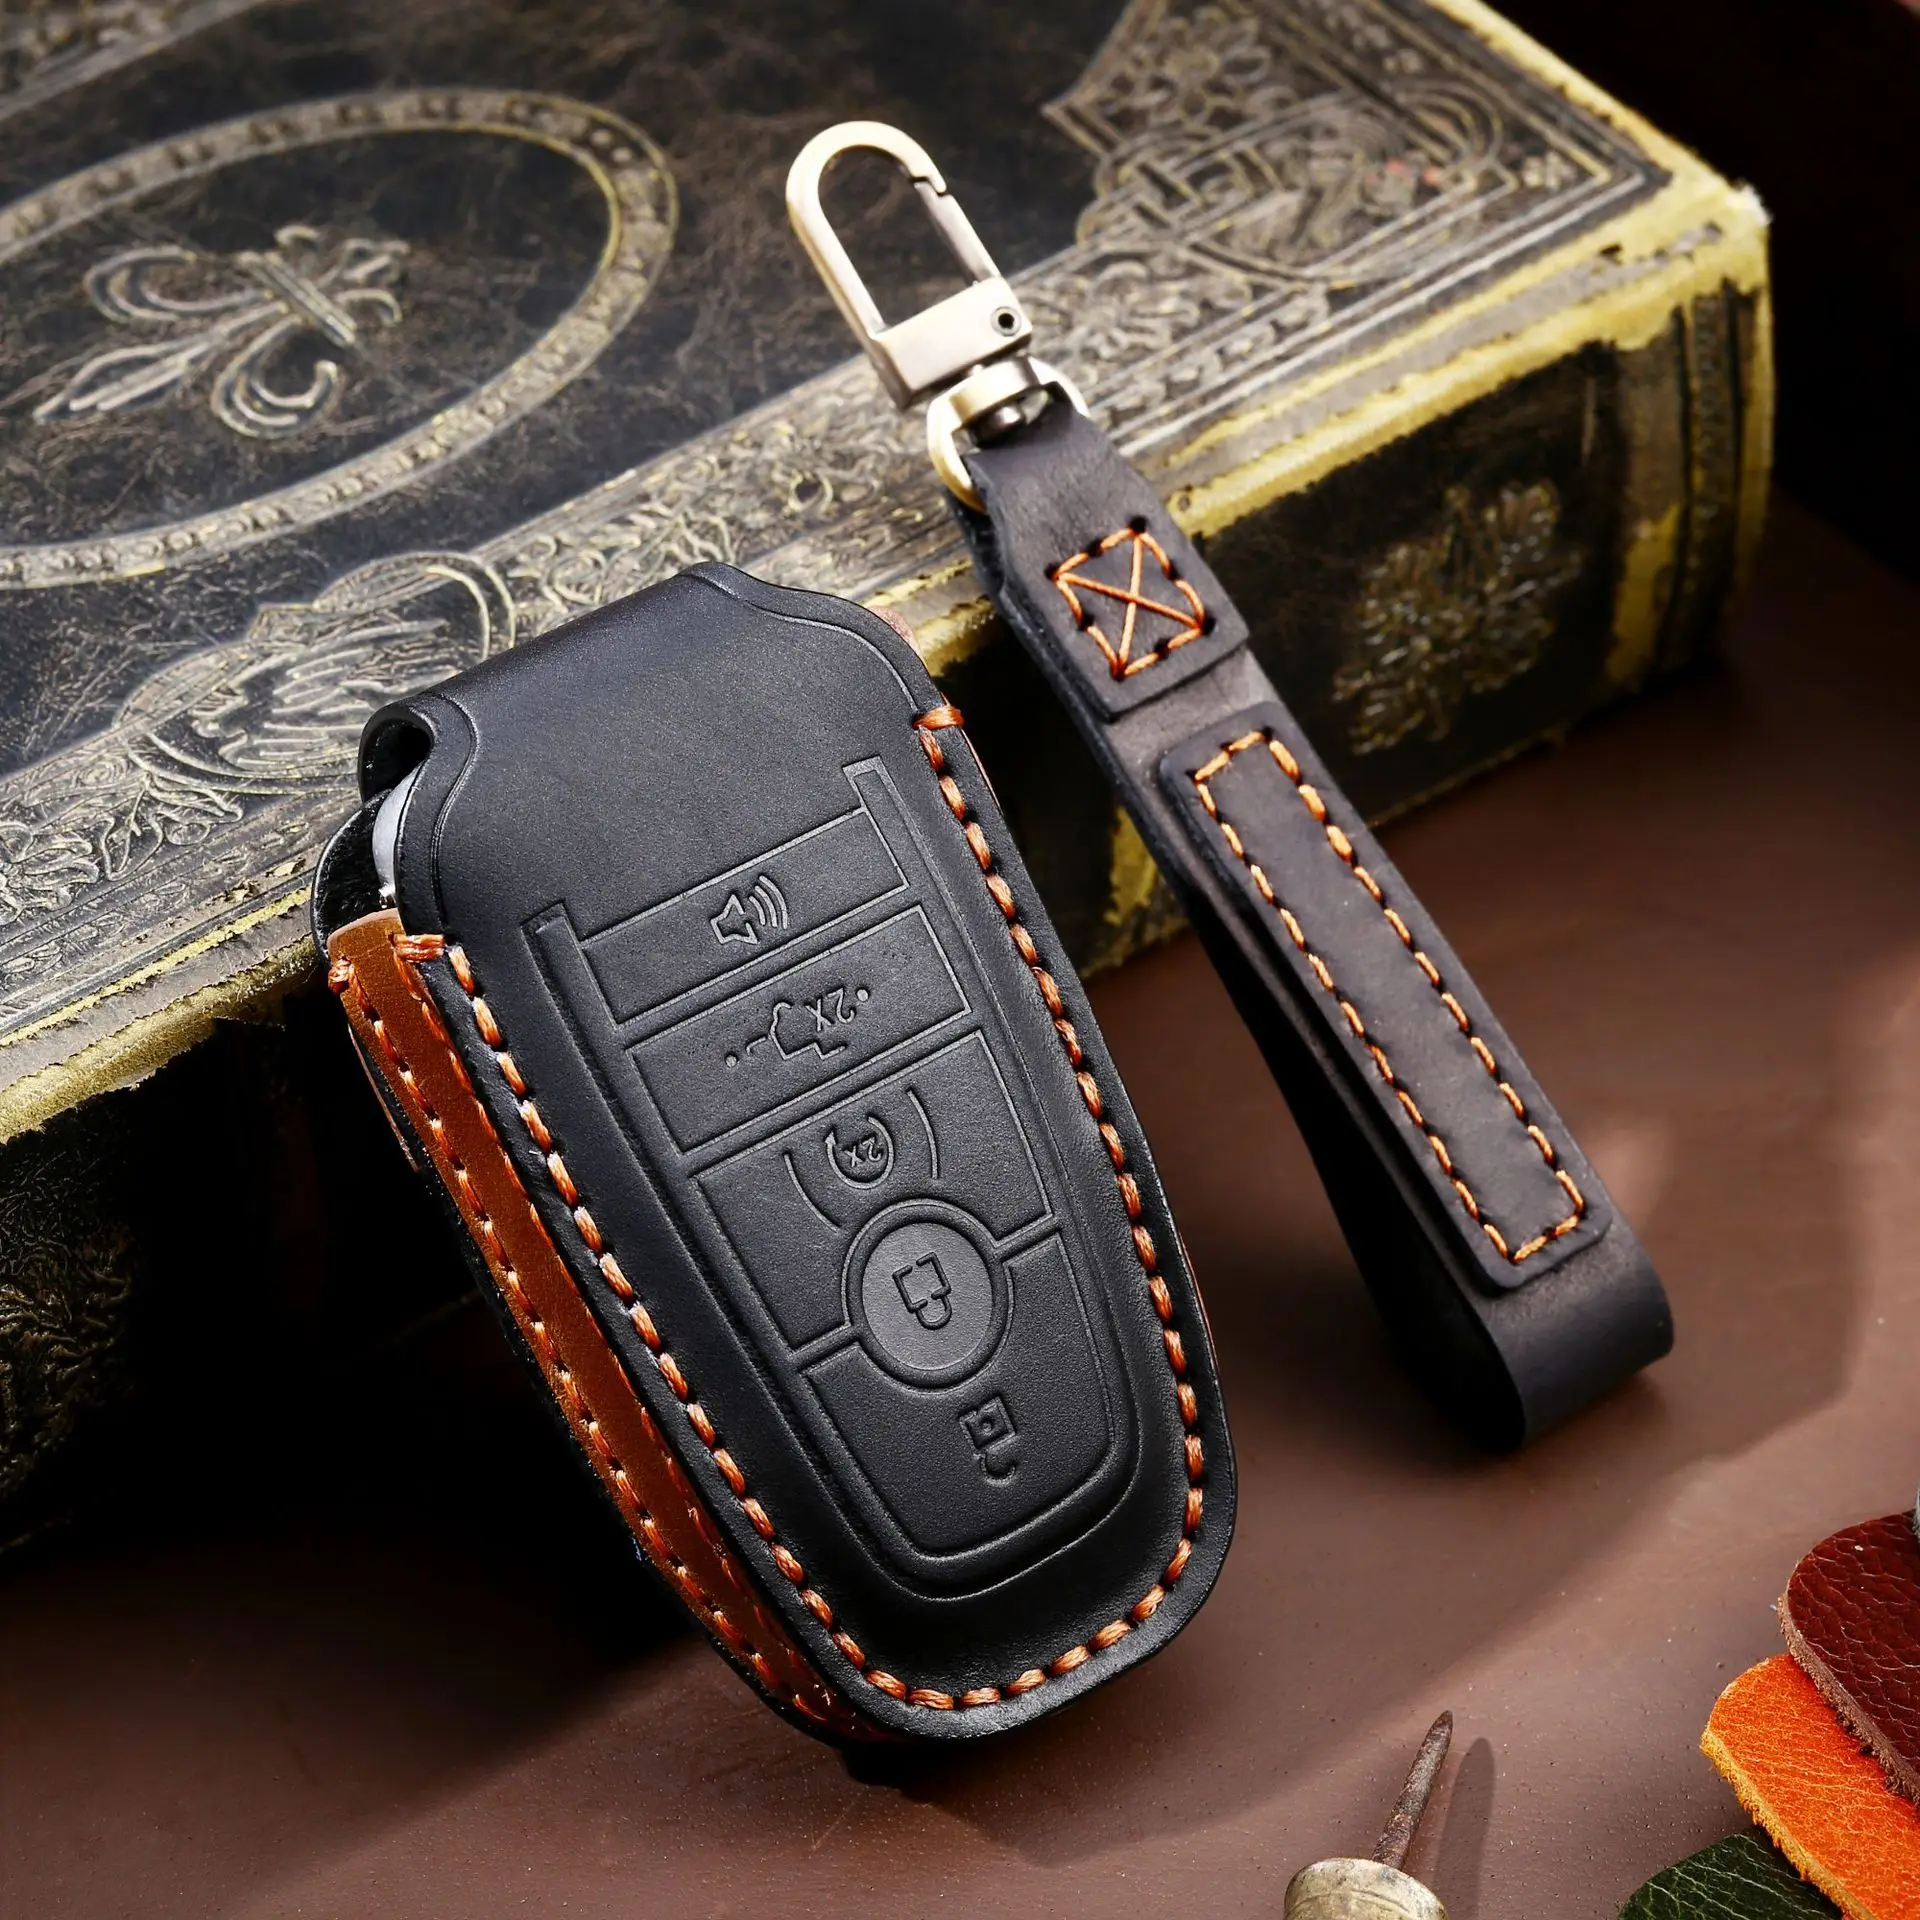 Leather Car Key Case Cover Fob Protector Keychain for Ford Mustang Explorer Edge Ecosport Fusion F150 F250 Accessories Holder